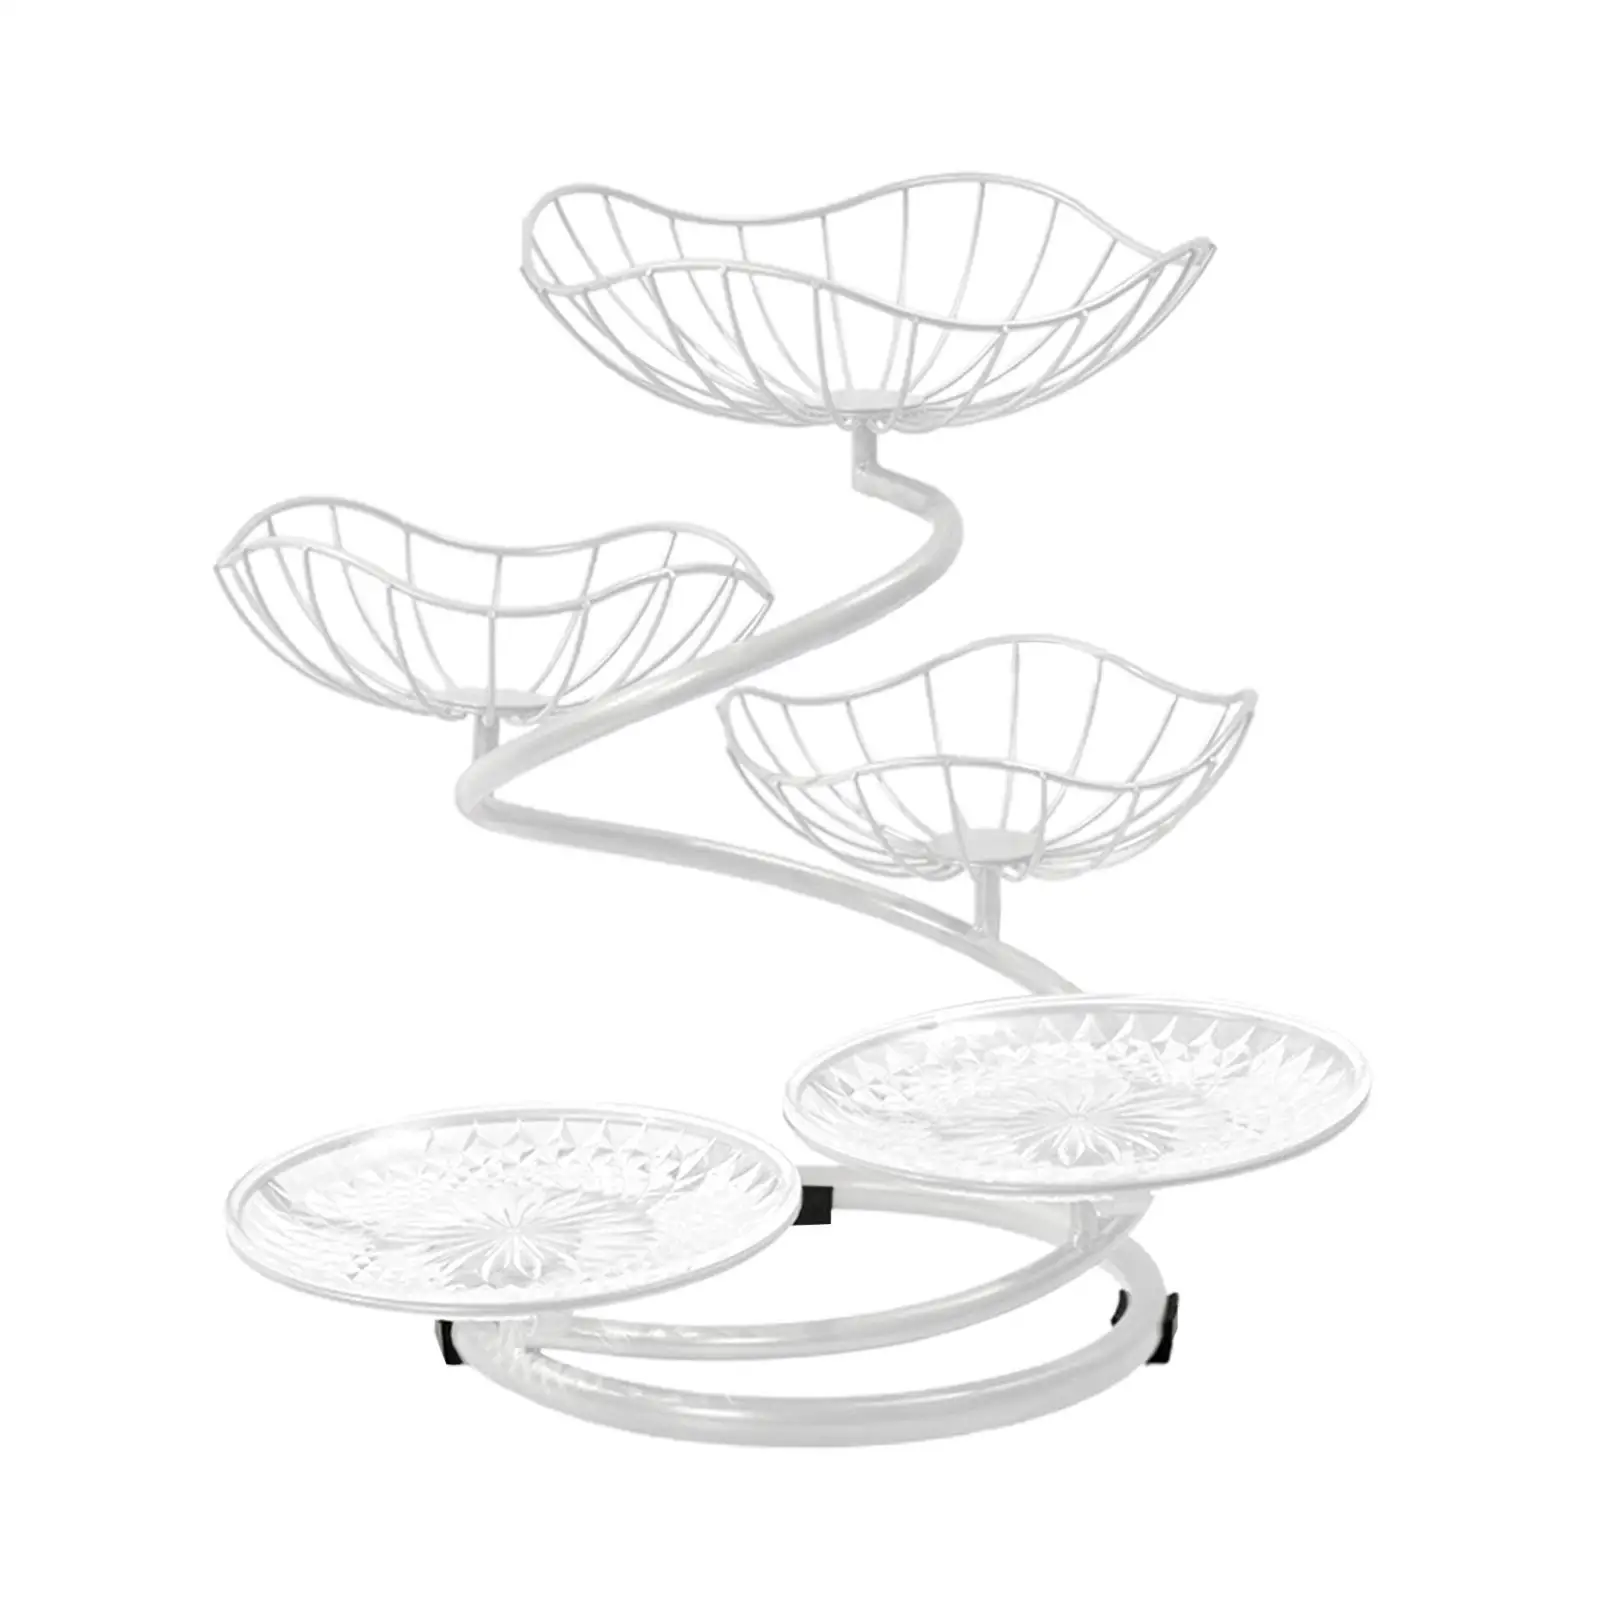 5 Tier Fruit Basket Bowl Serving Tray Counter Wrought Iron Fruit Stand Container Space Saving Modern Metal Wire Fruit Holder